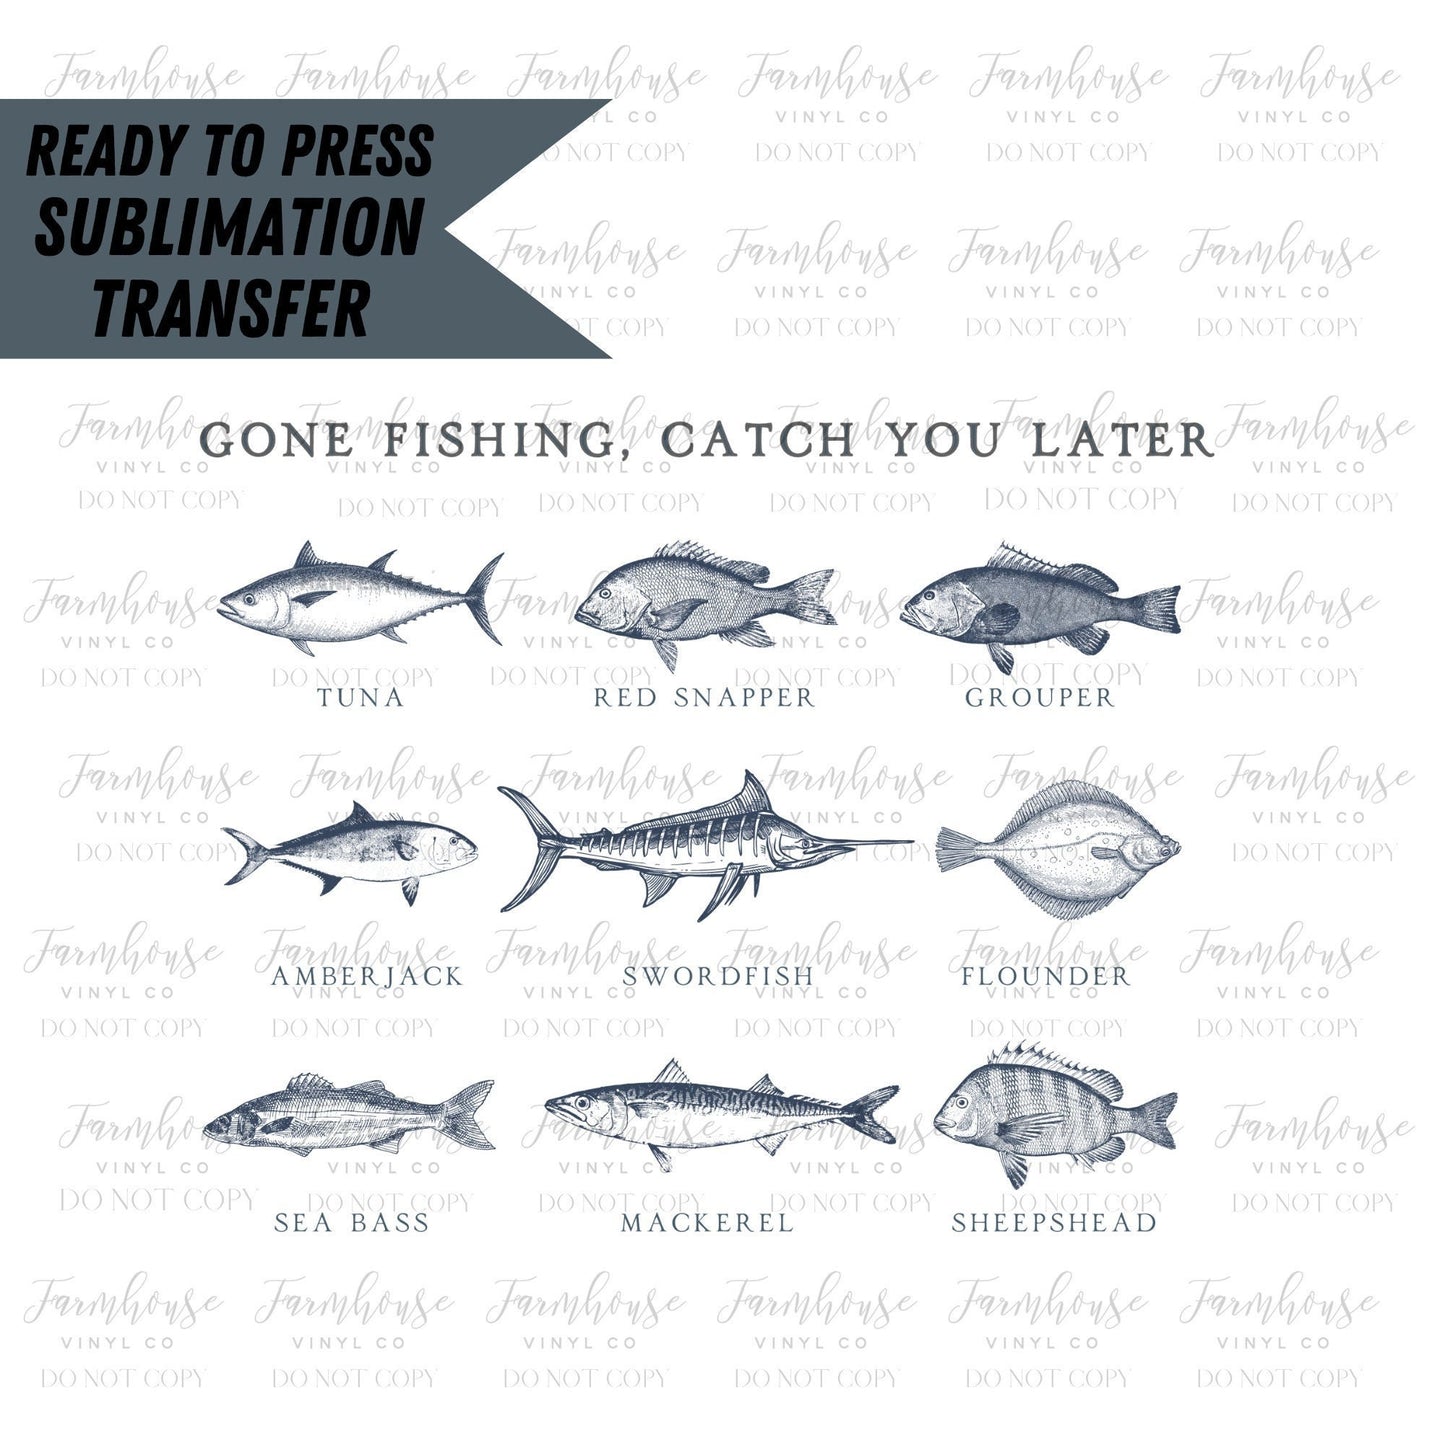 Gone Fishing Catch You Later, Classic Fishing Transfer, Father's Day Design, Ready To Press, Sublimation Transfers, Father Son Design - Farmhouse Vinyl Co